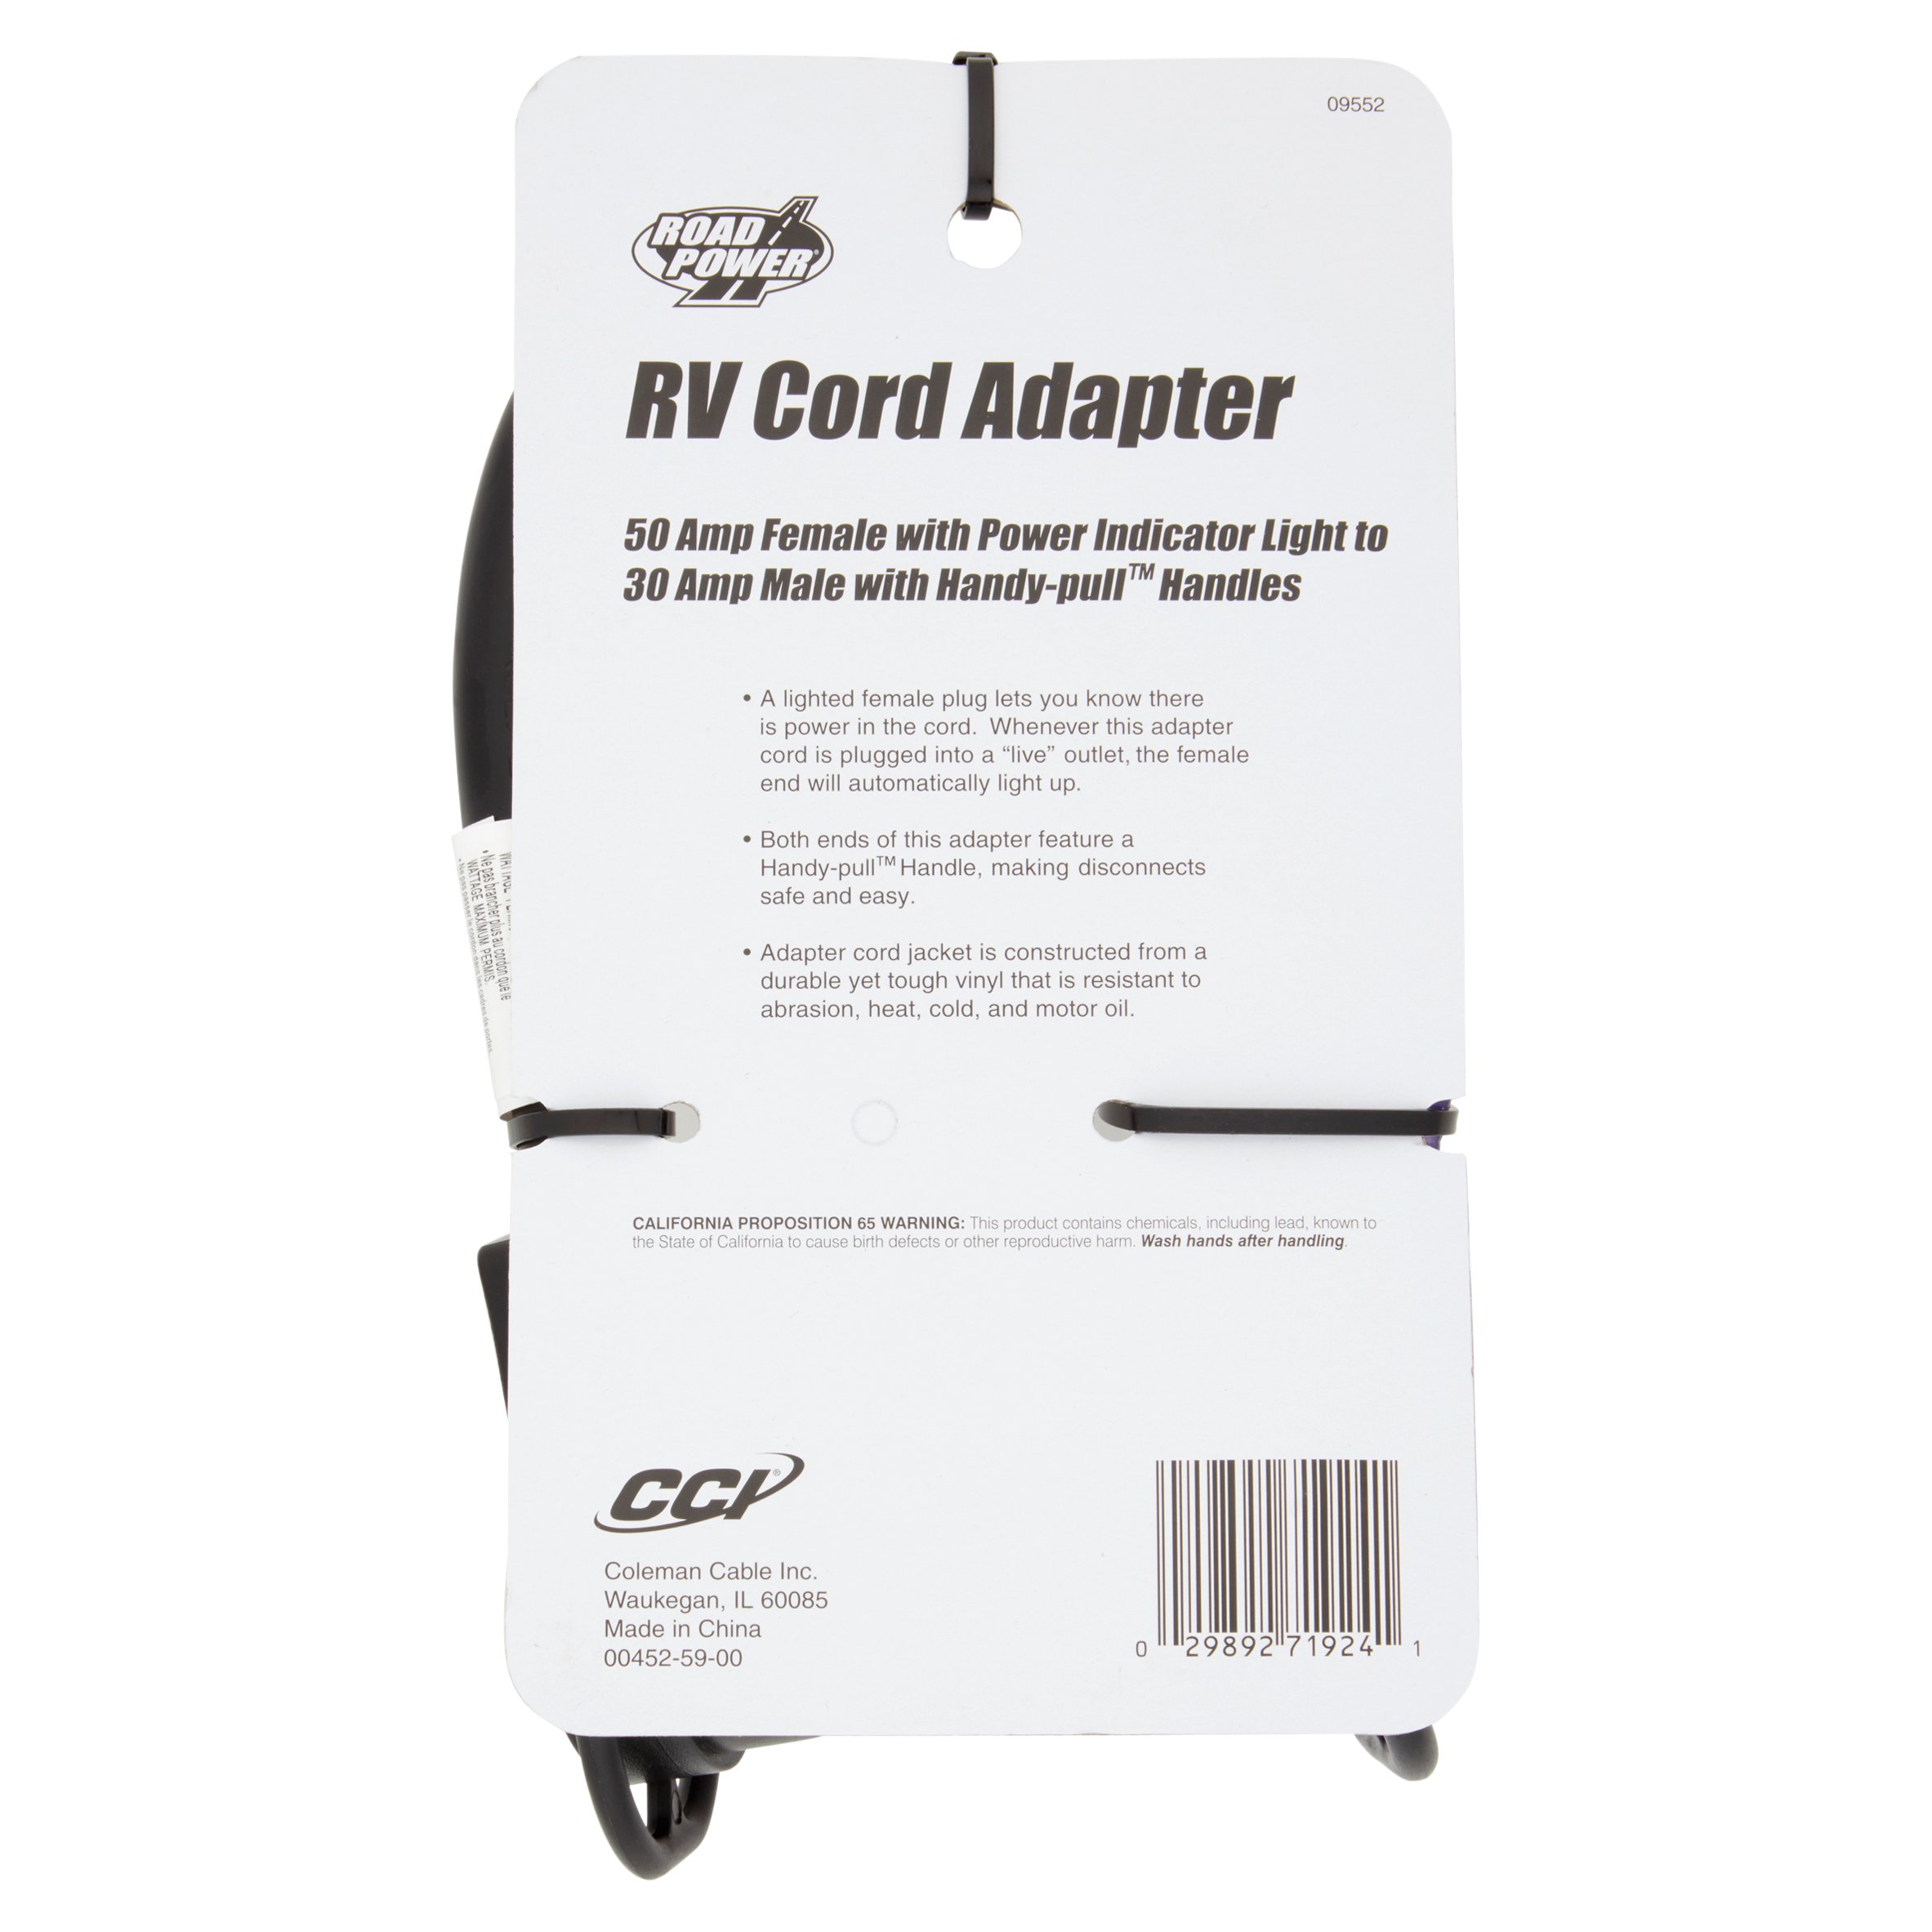 Road Power RV Cord Adapter - image 4 of 5